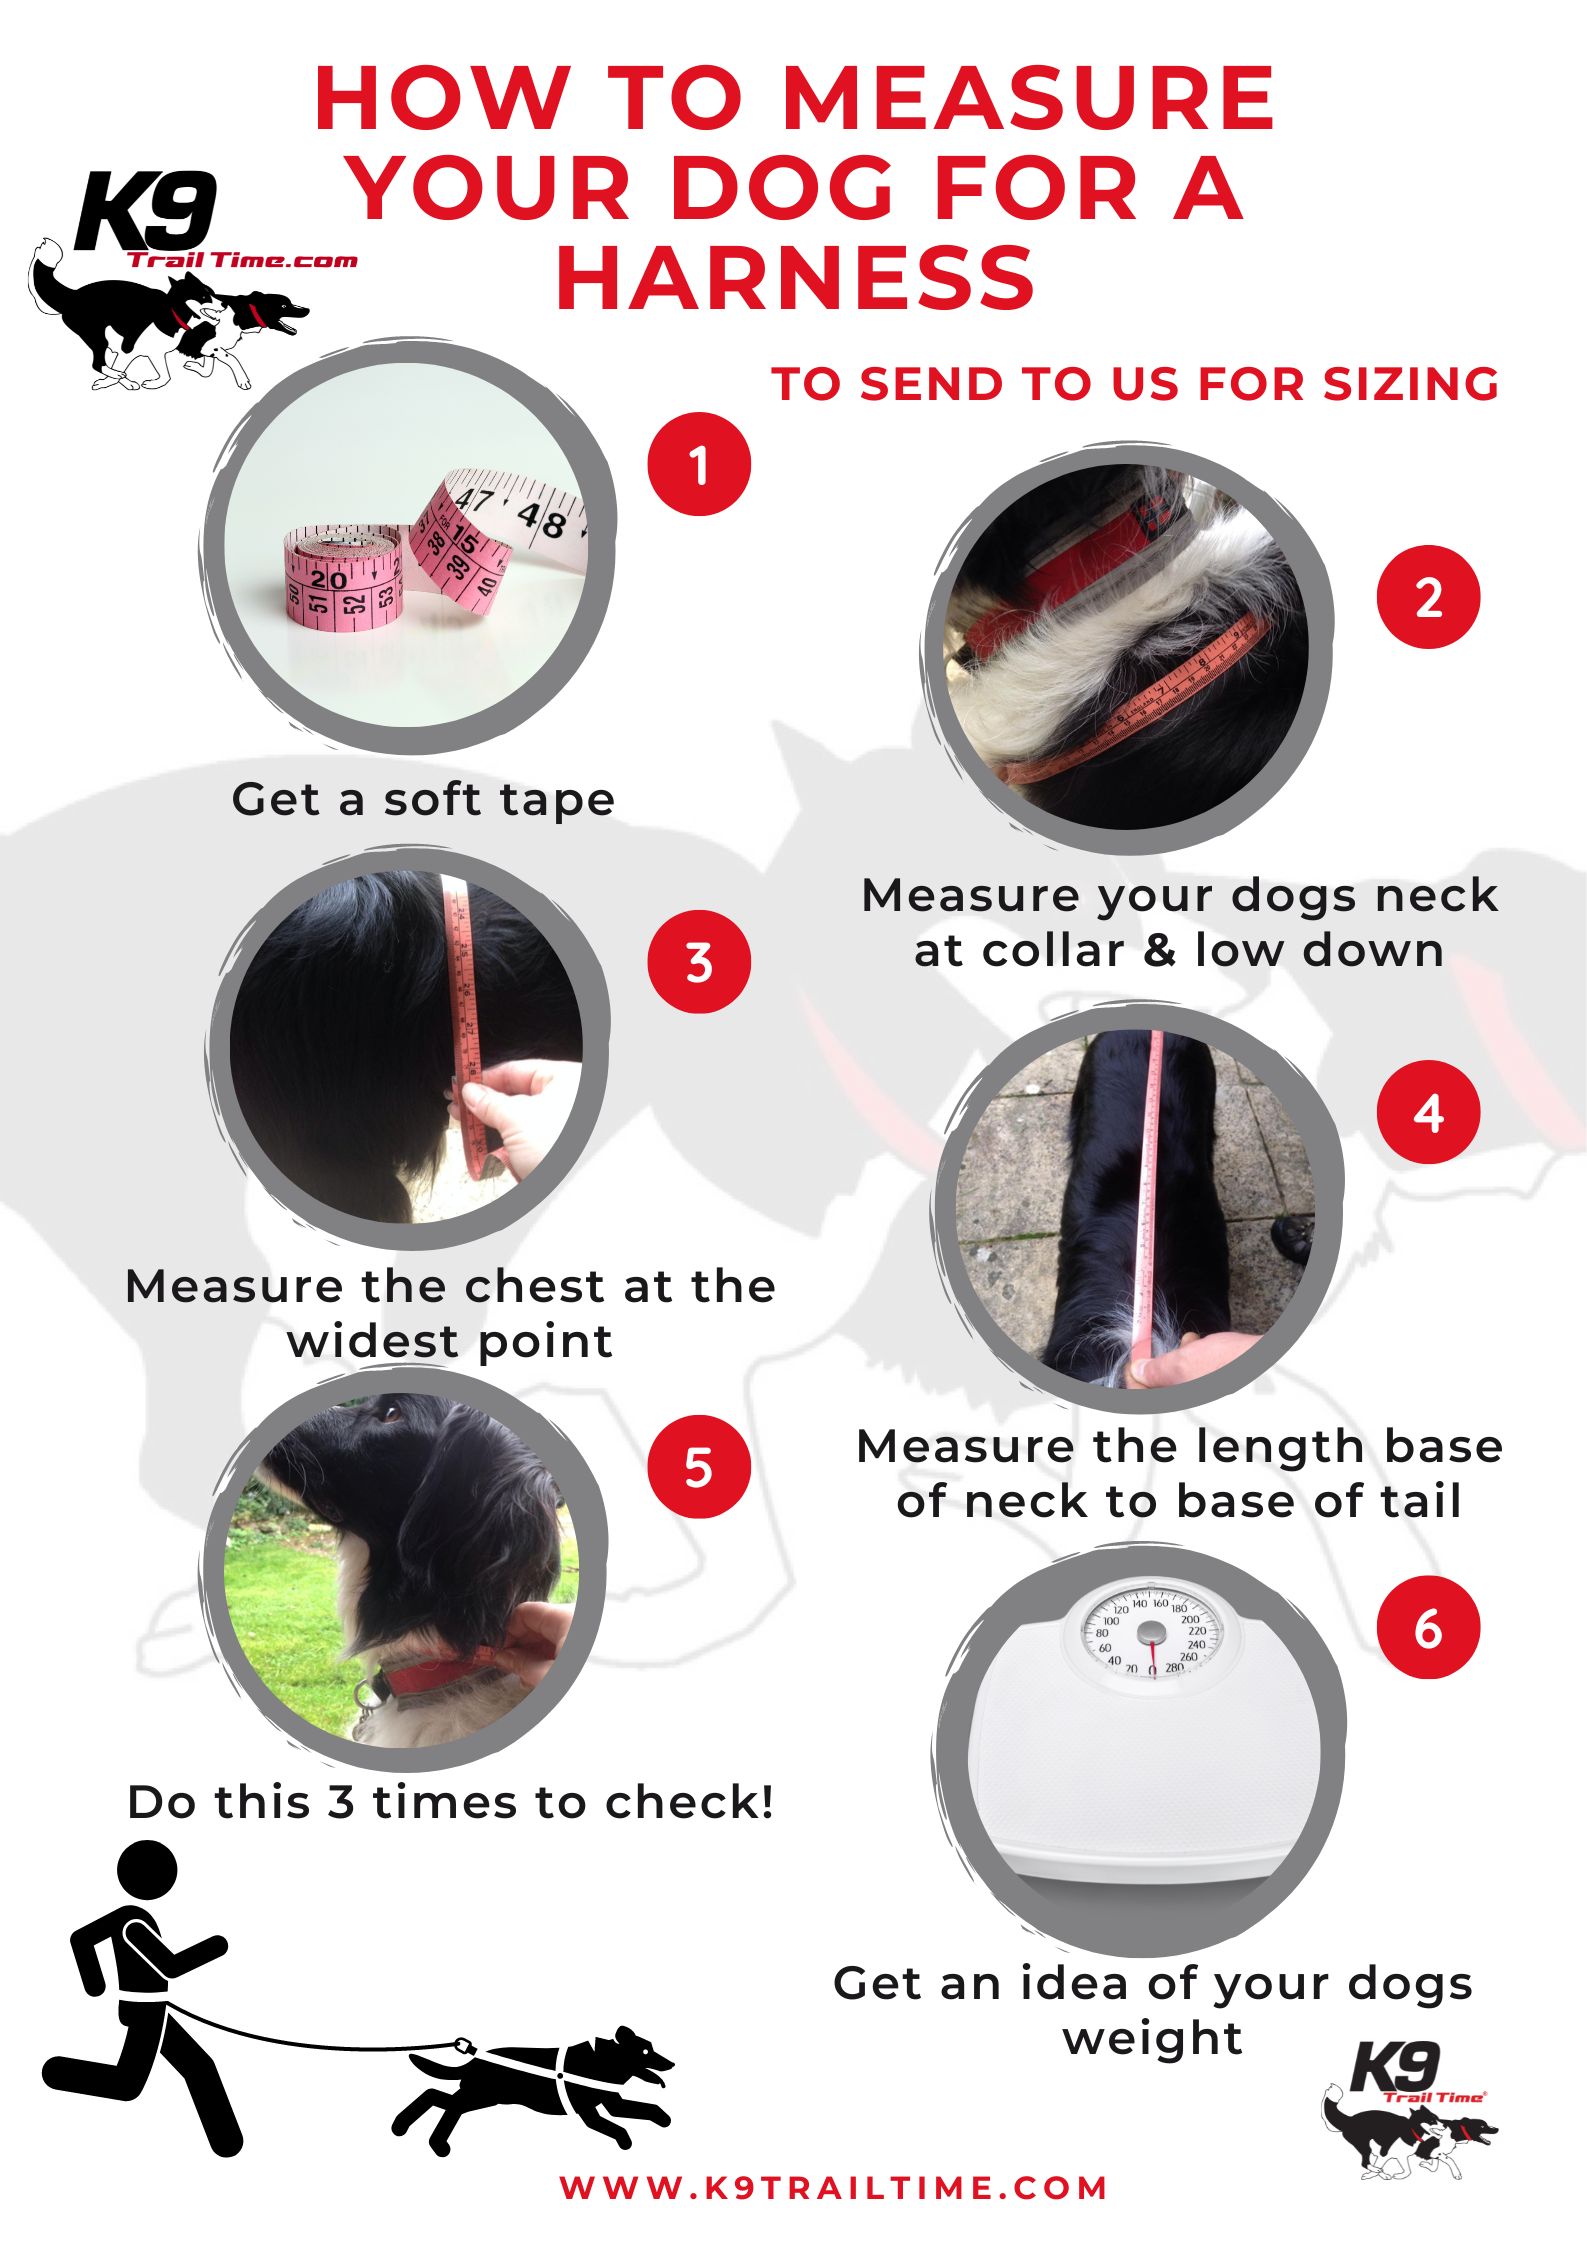 FREE Downloadable Guide To Measuring Your Dog For A Harness